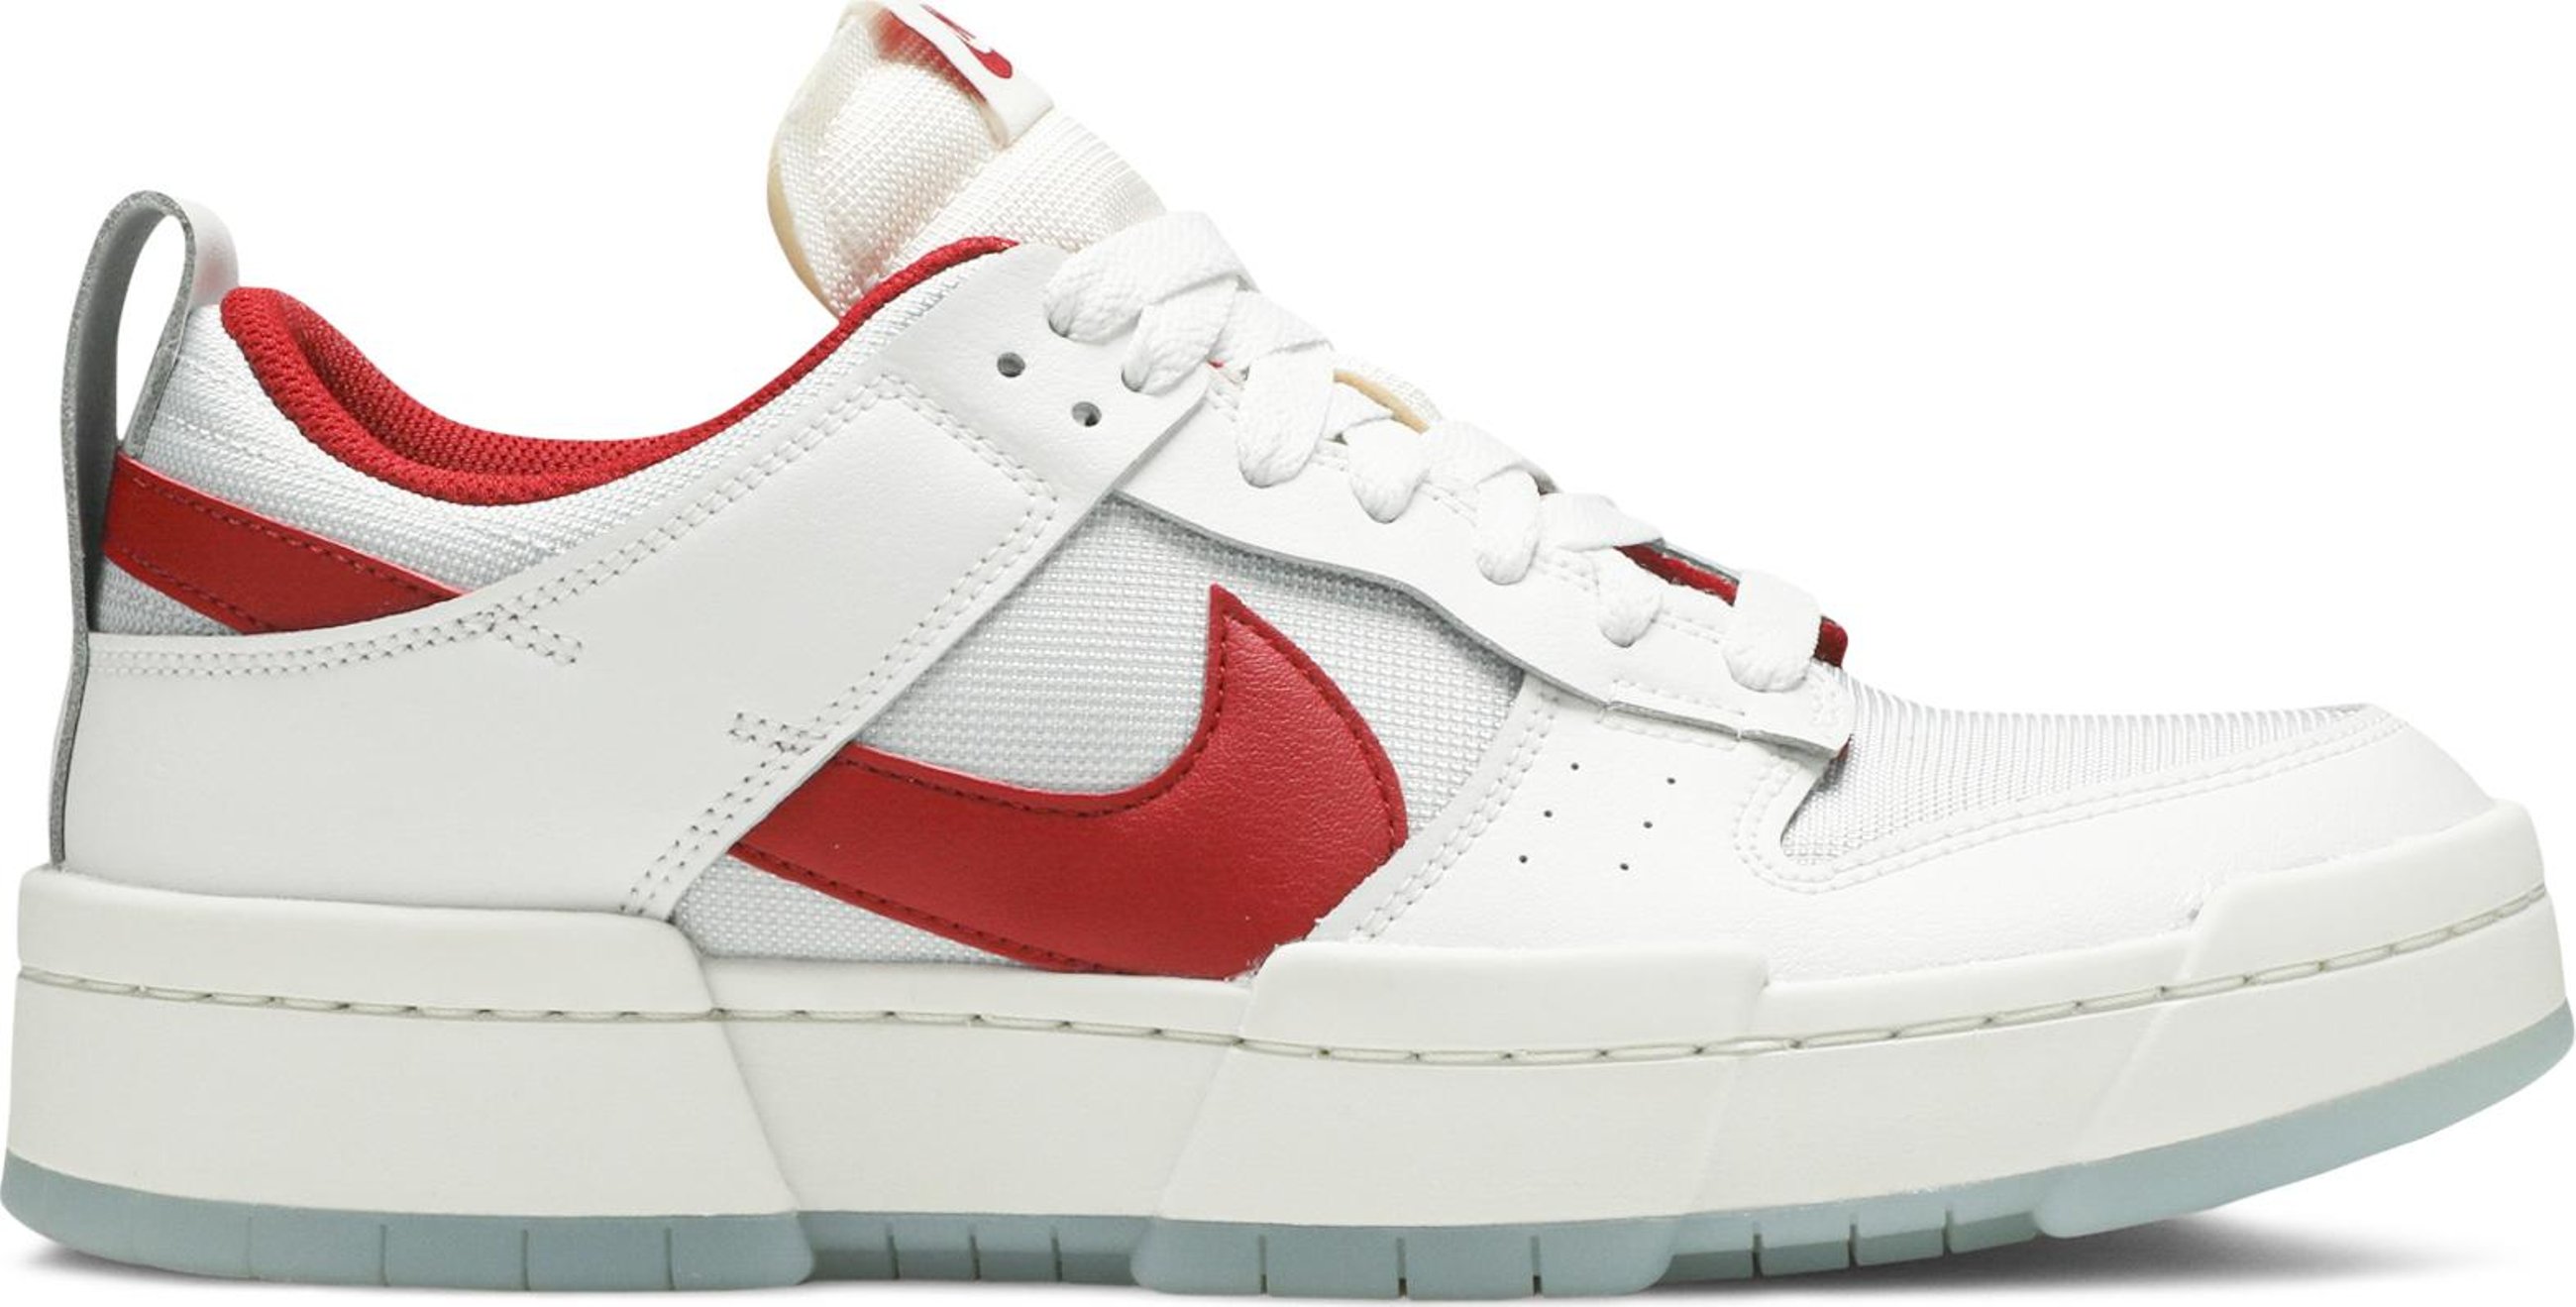 Buy Wmns Dunk Low Disrupt 'White Gym Red' - CK6654 101 | GOAT